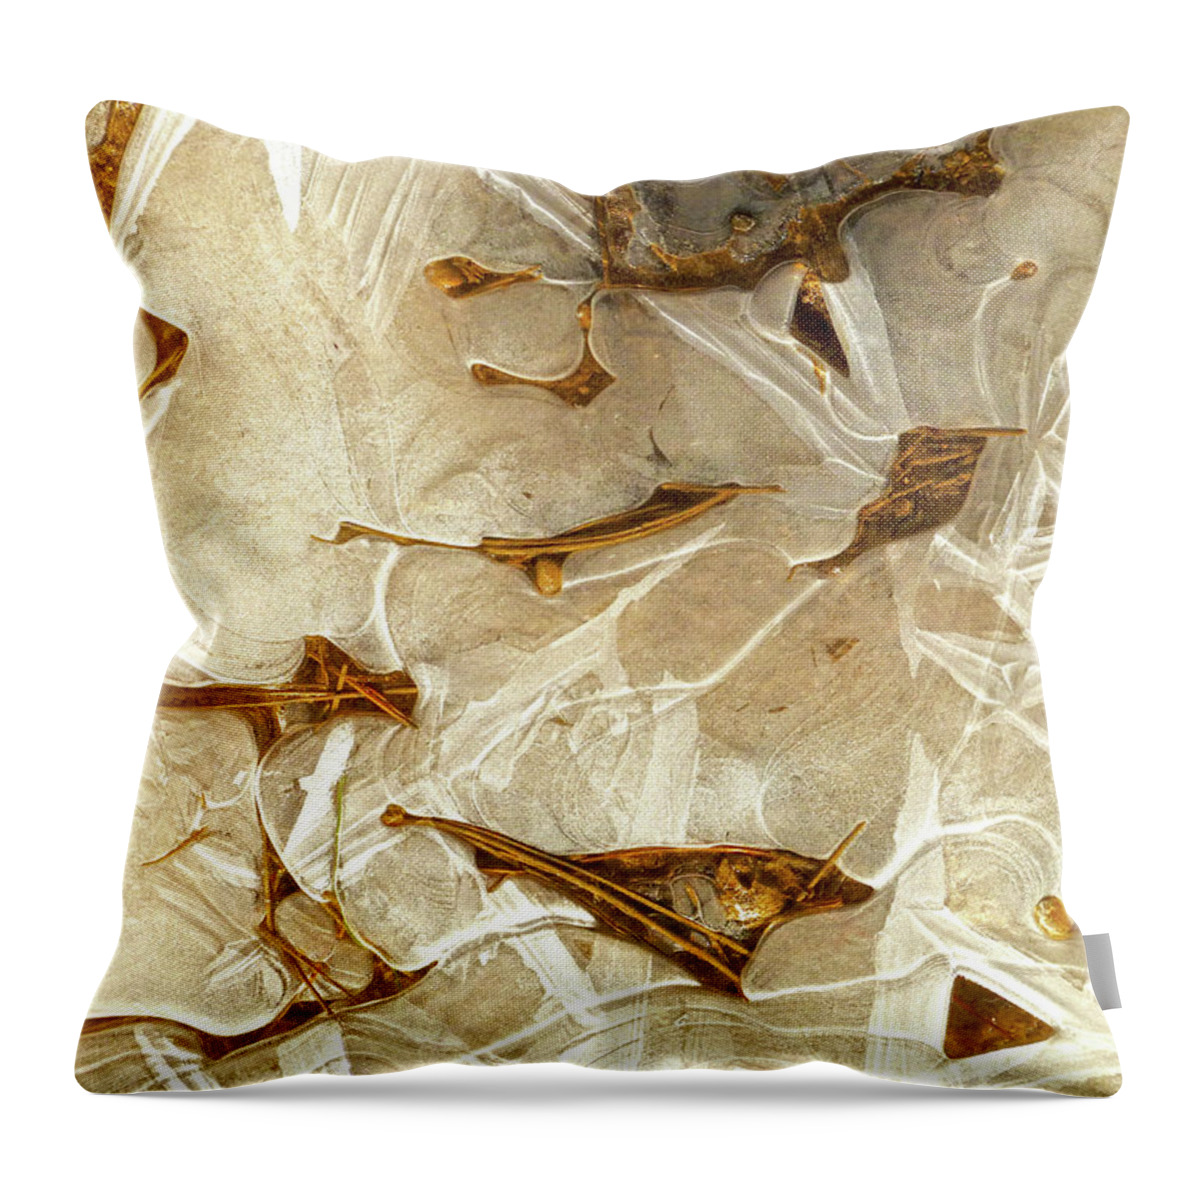 Bryce Canyon Throw Pillow featuring the photograph Ice and Needles, Bryce Canyon by Amelia Racca